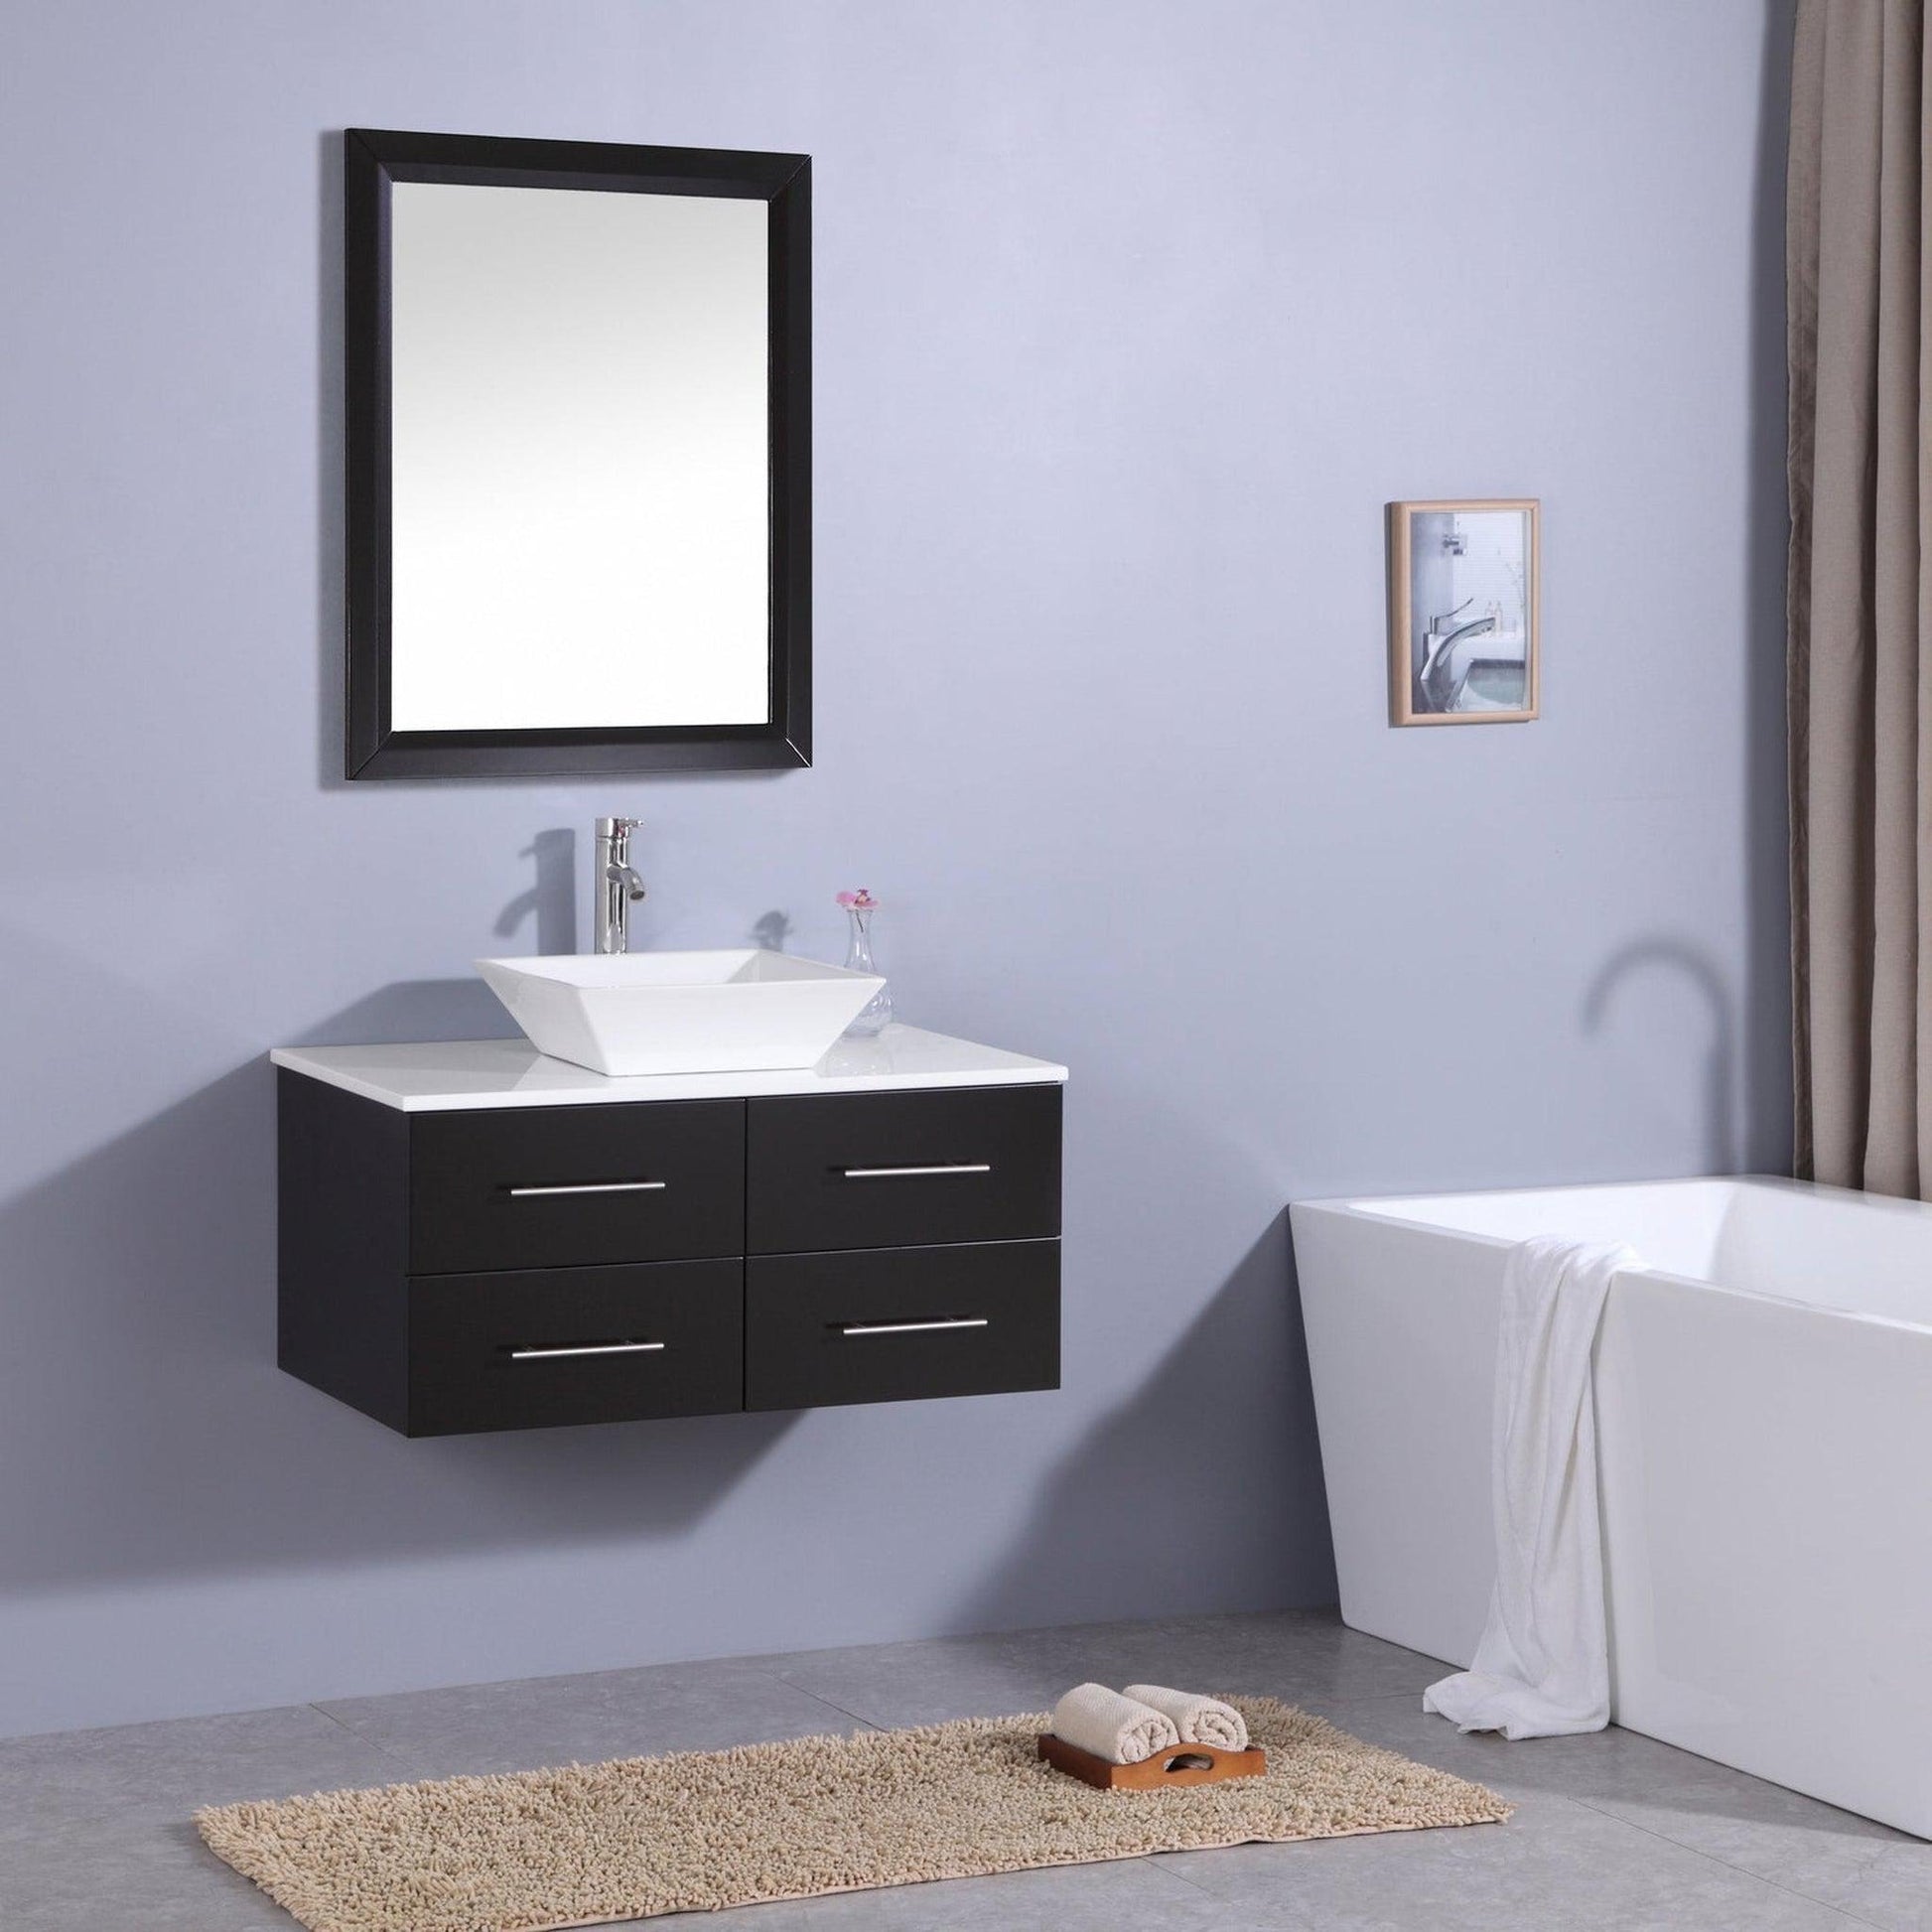 Eviva Totti Wave 36" x 16" Espresso Wall-Mounted Bathroom Vanity With White Man-Made Stone Countertop and Single Porcelain Sink